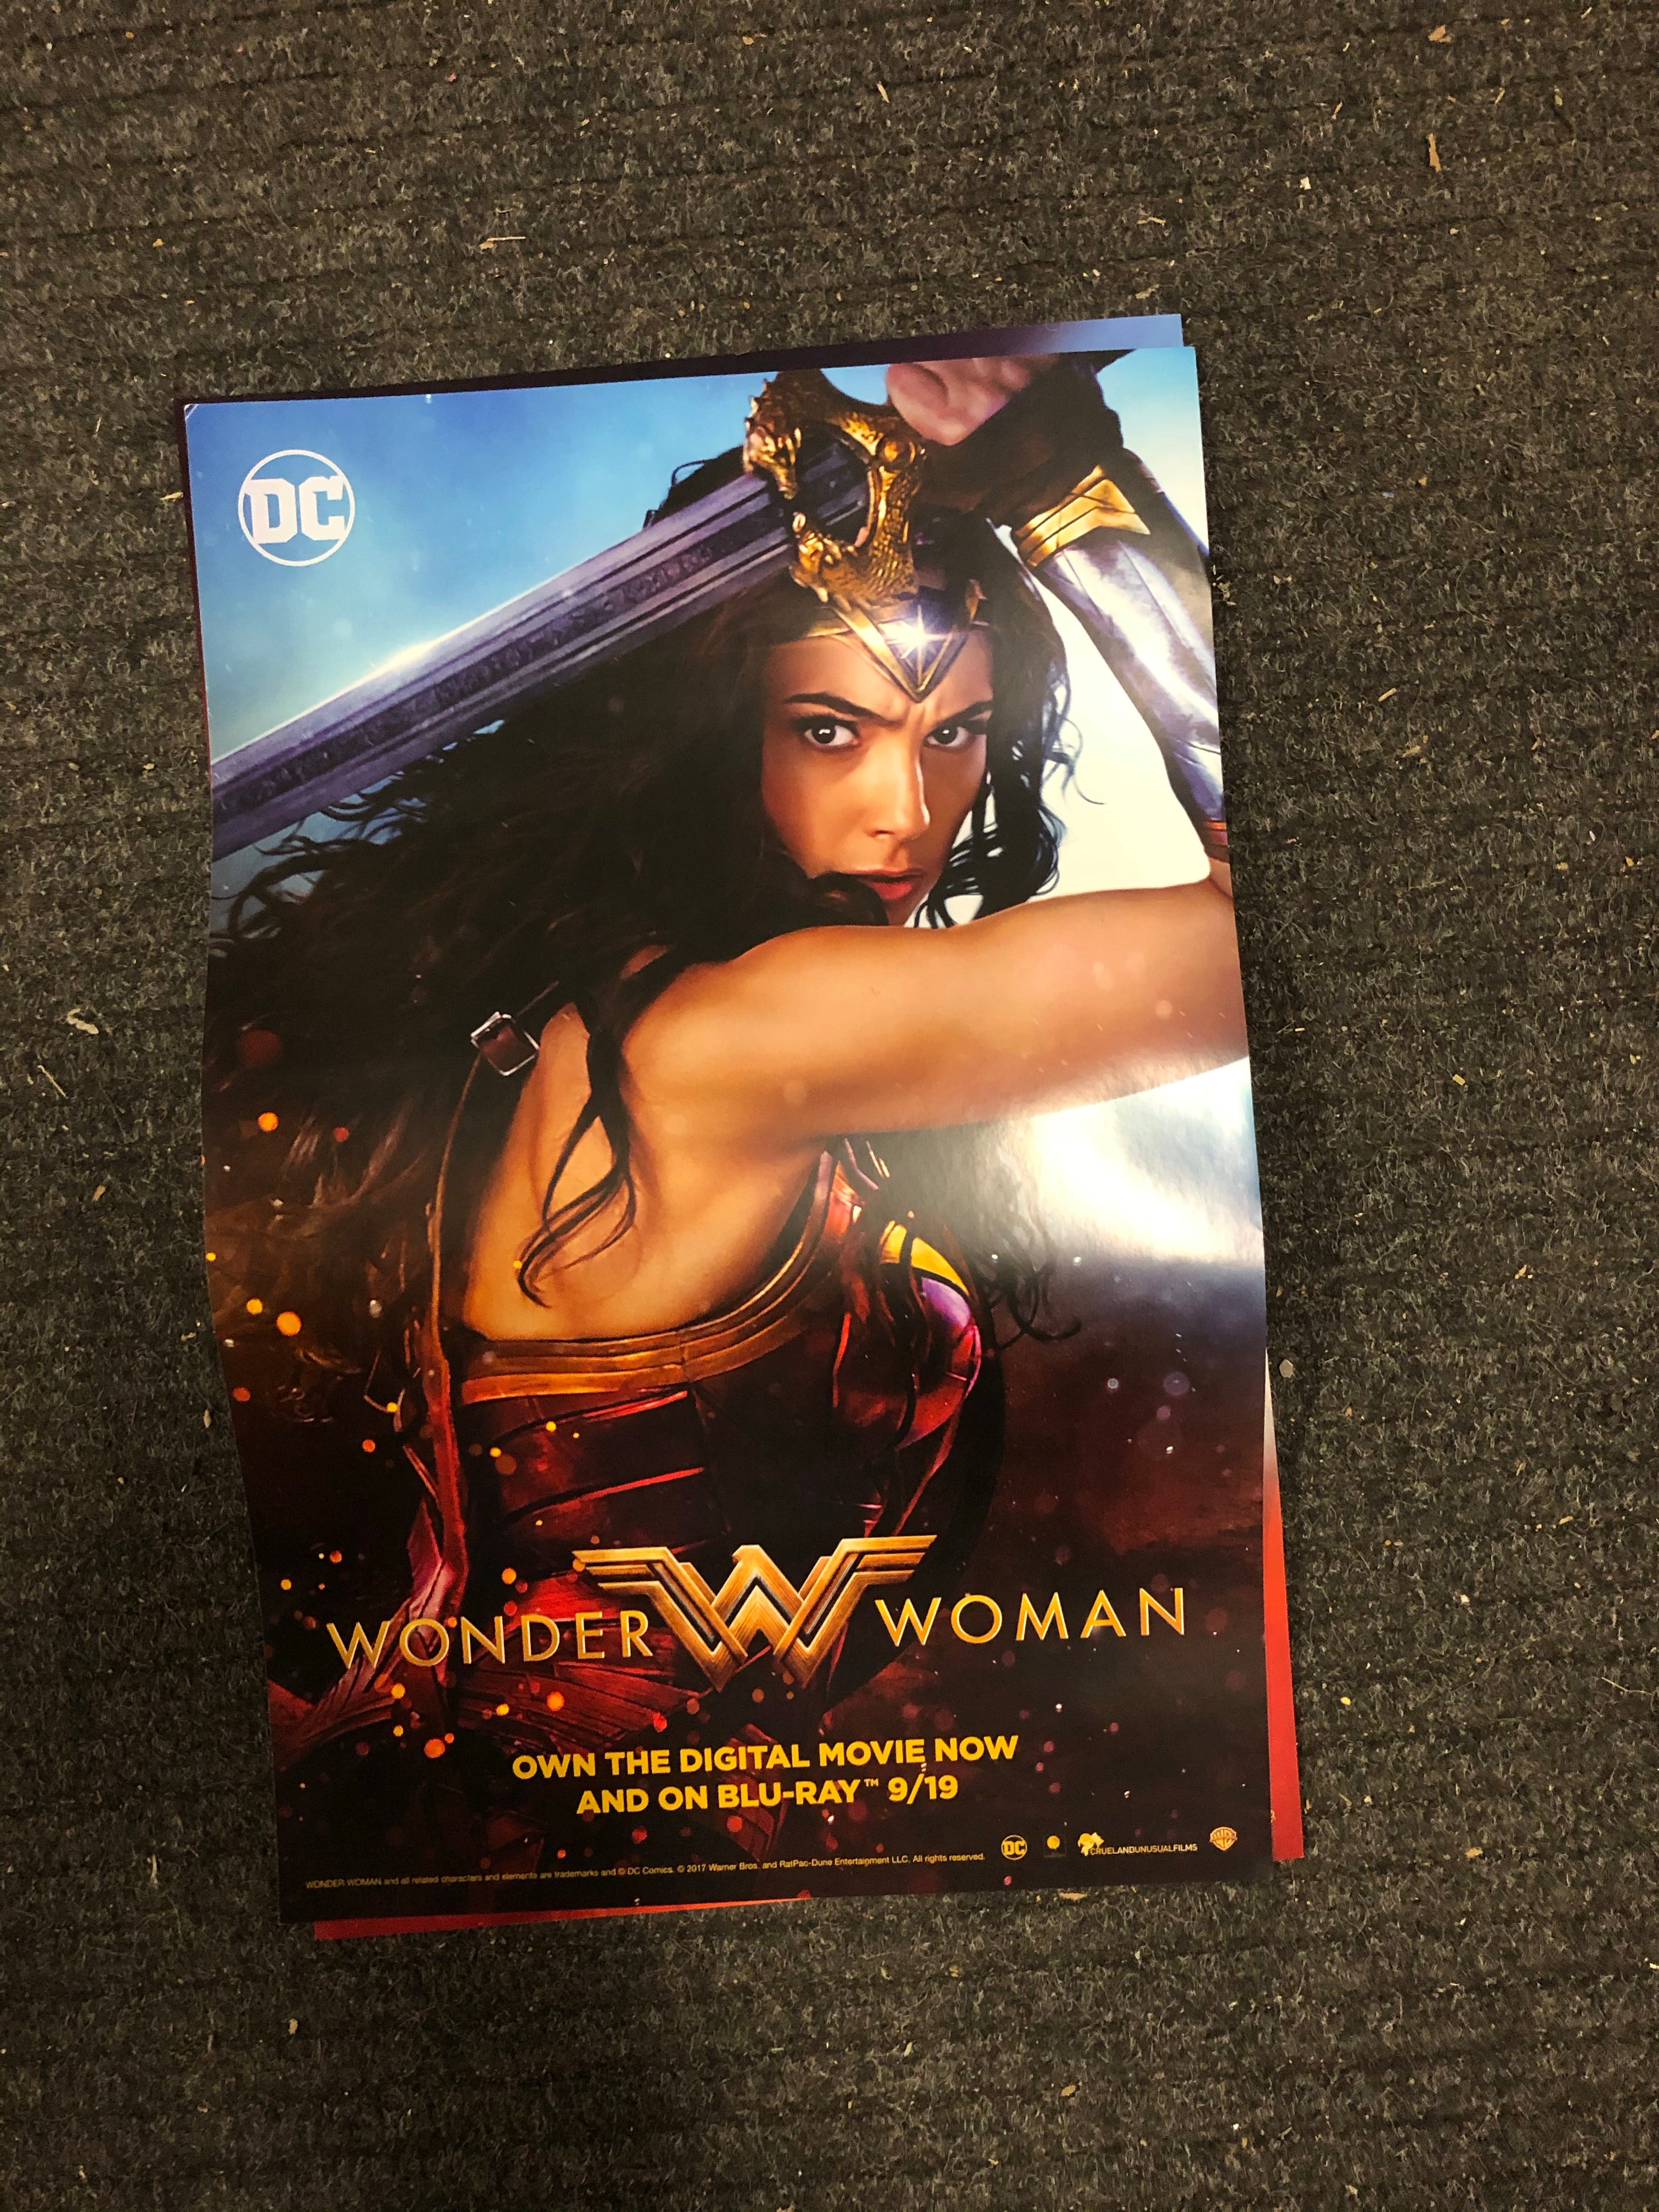 Wonder Woman rare limited issue DVD two posters 2017